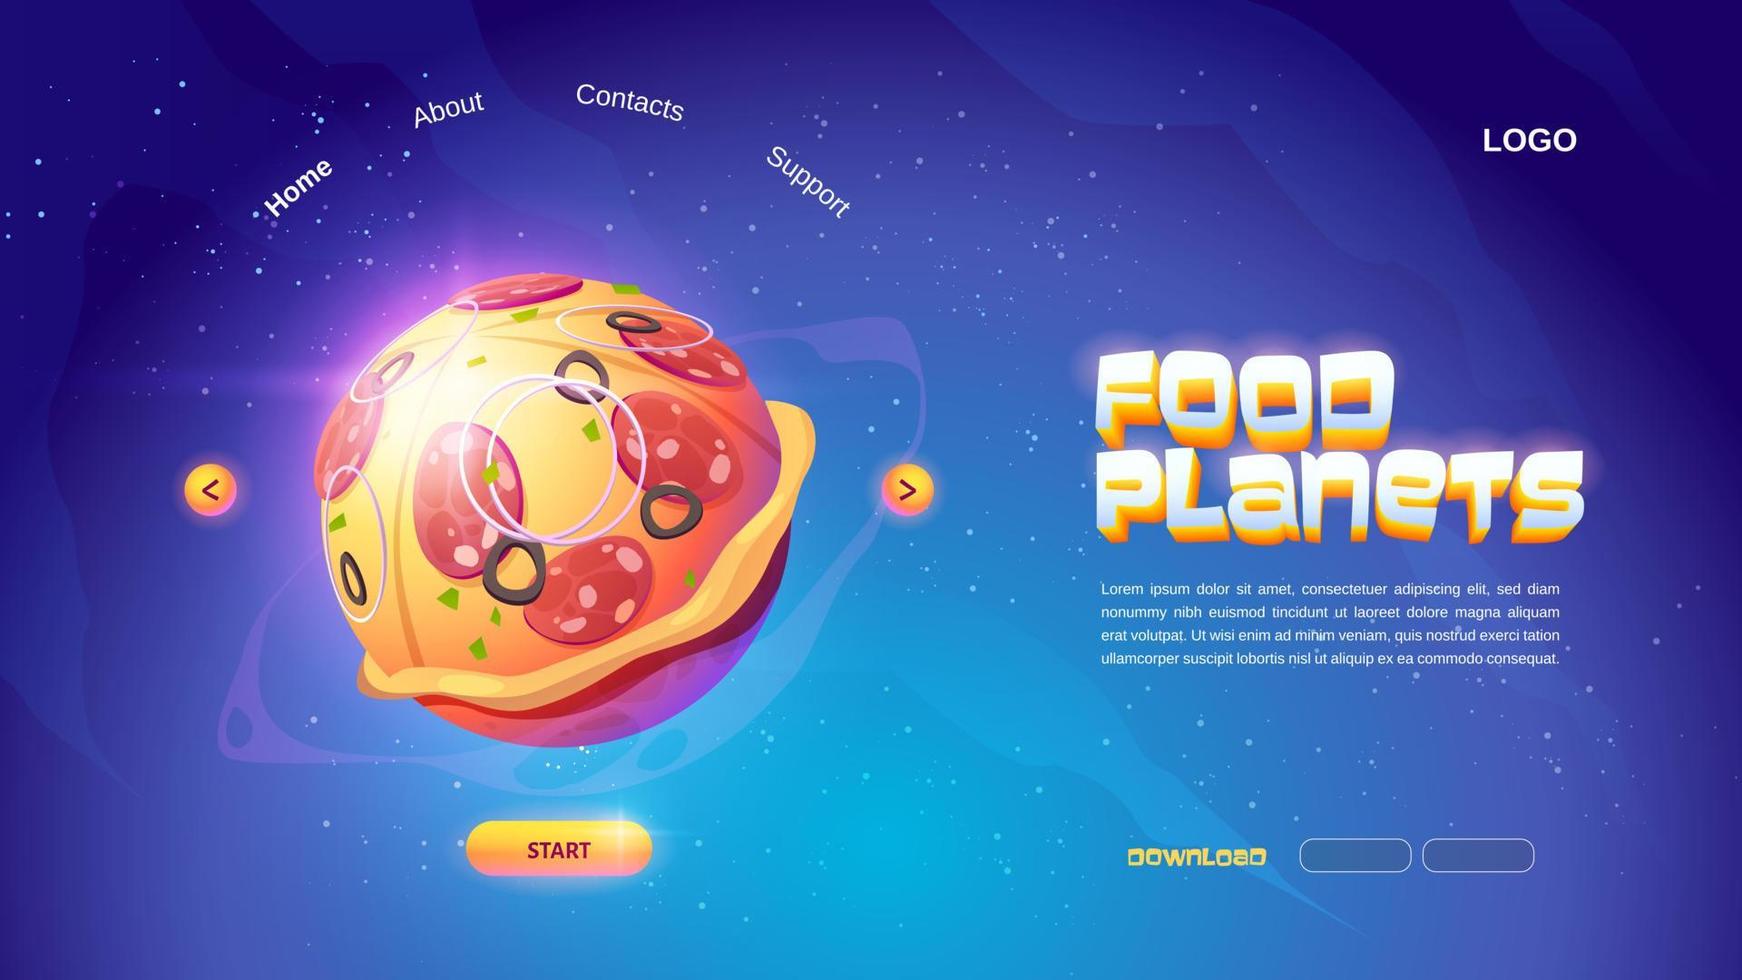 Food planets cartoon landing page with space pizza vector